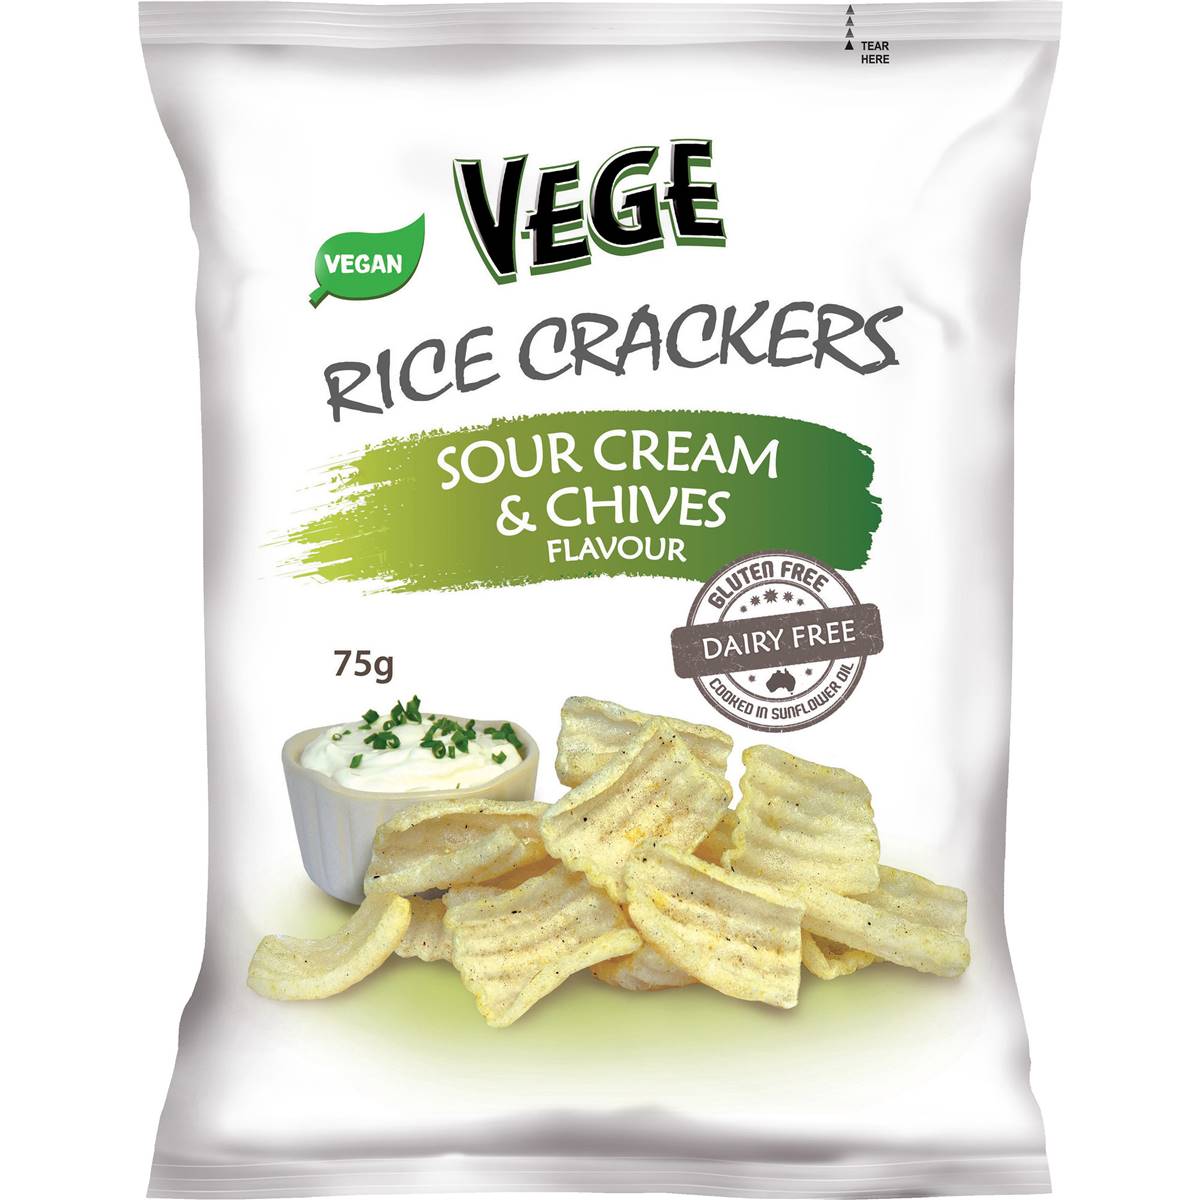 Calories in Vege Chips Rice Crackers Sour Cream & Chives